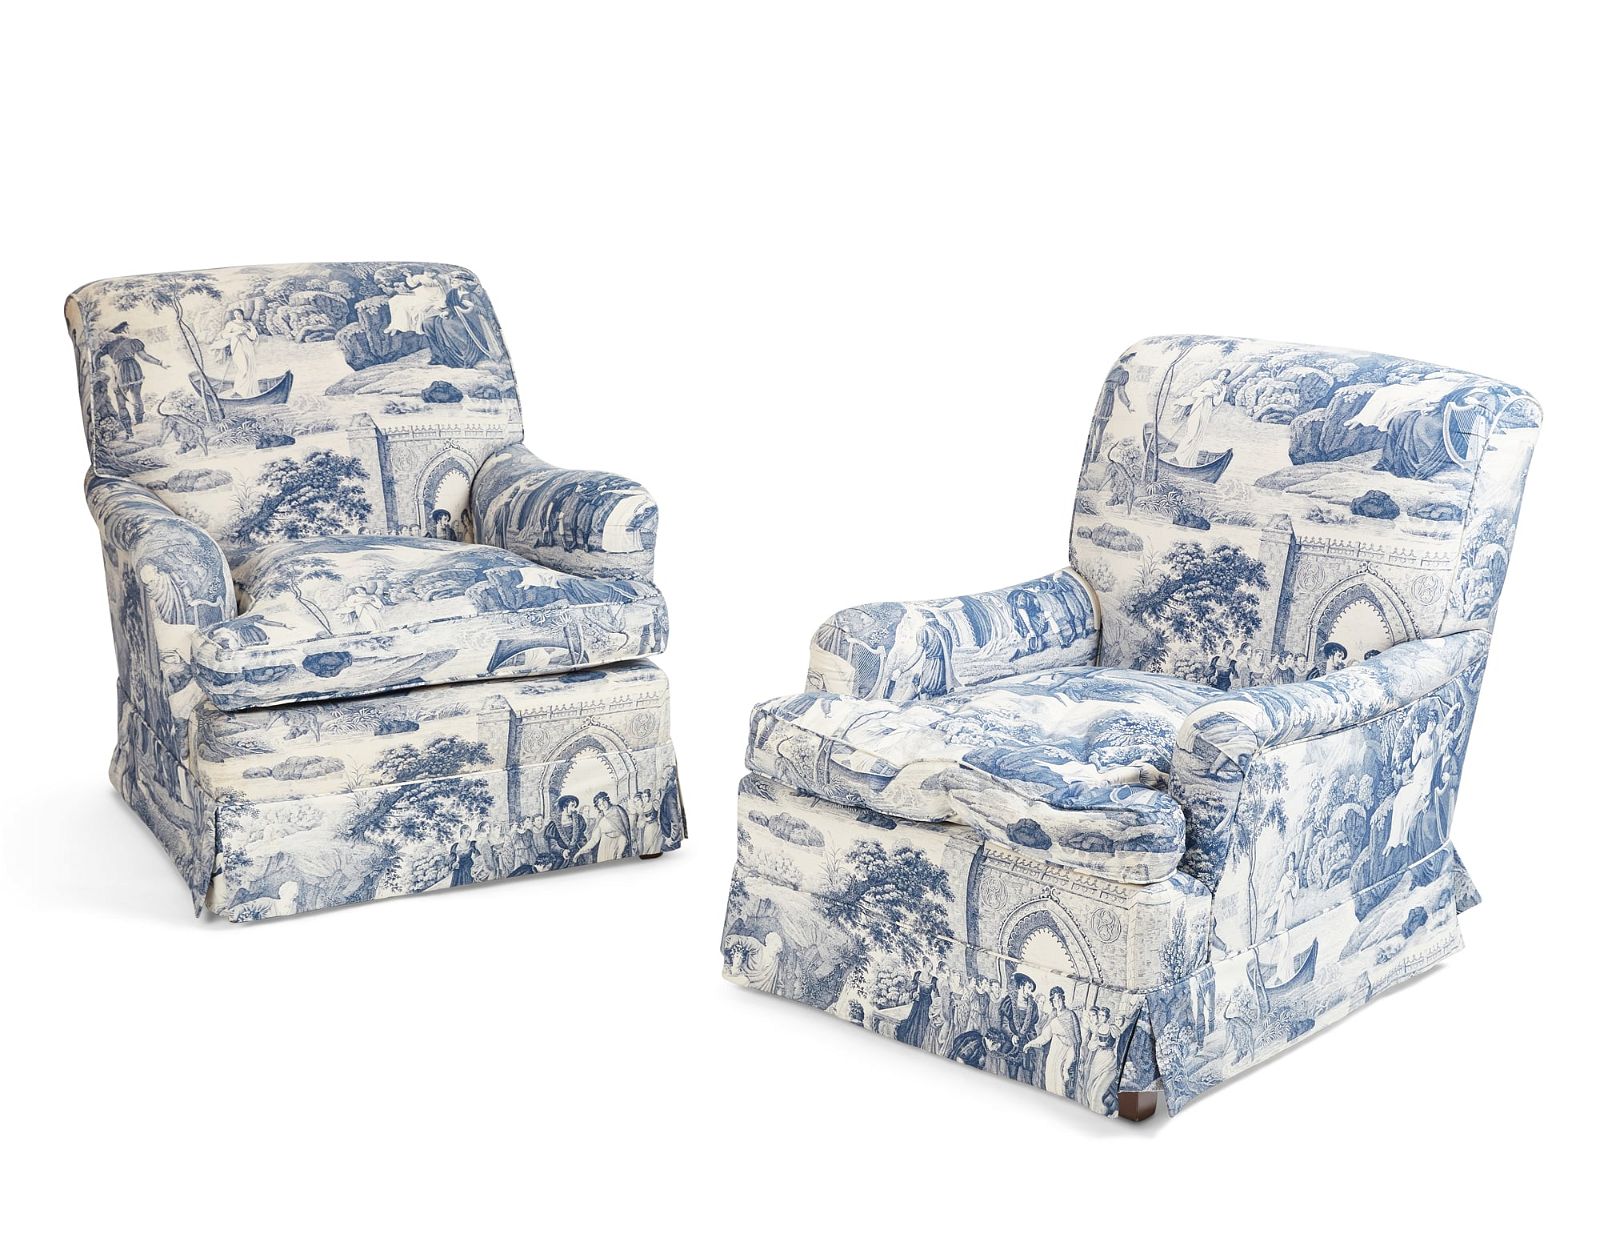 A PAIR OF BLUE AND WHITE UPHOLSTERED